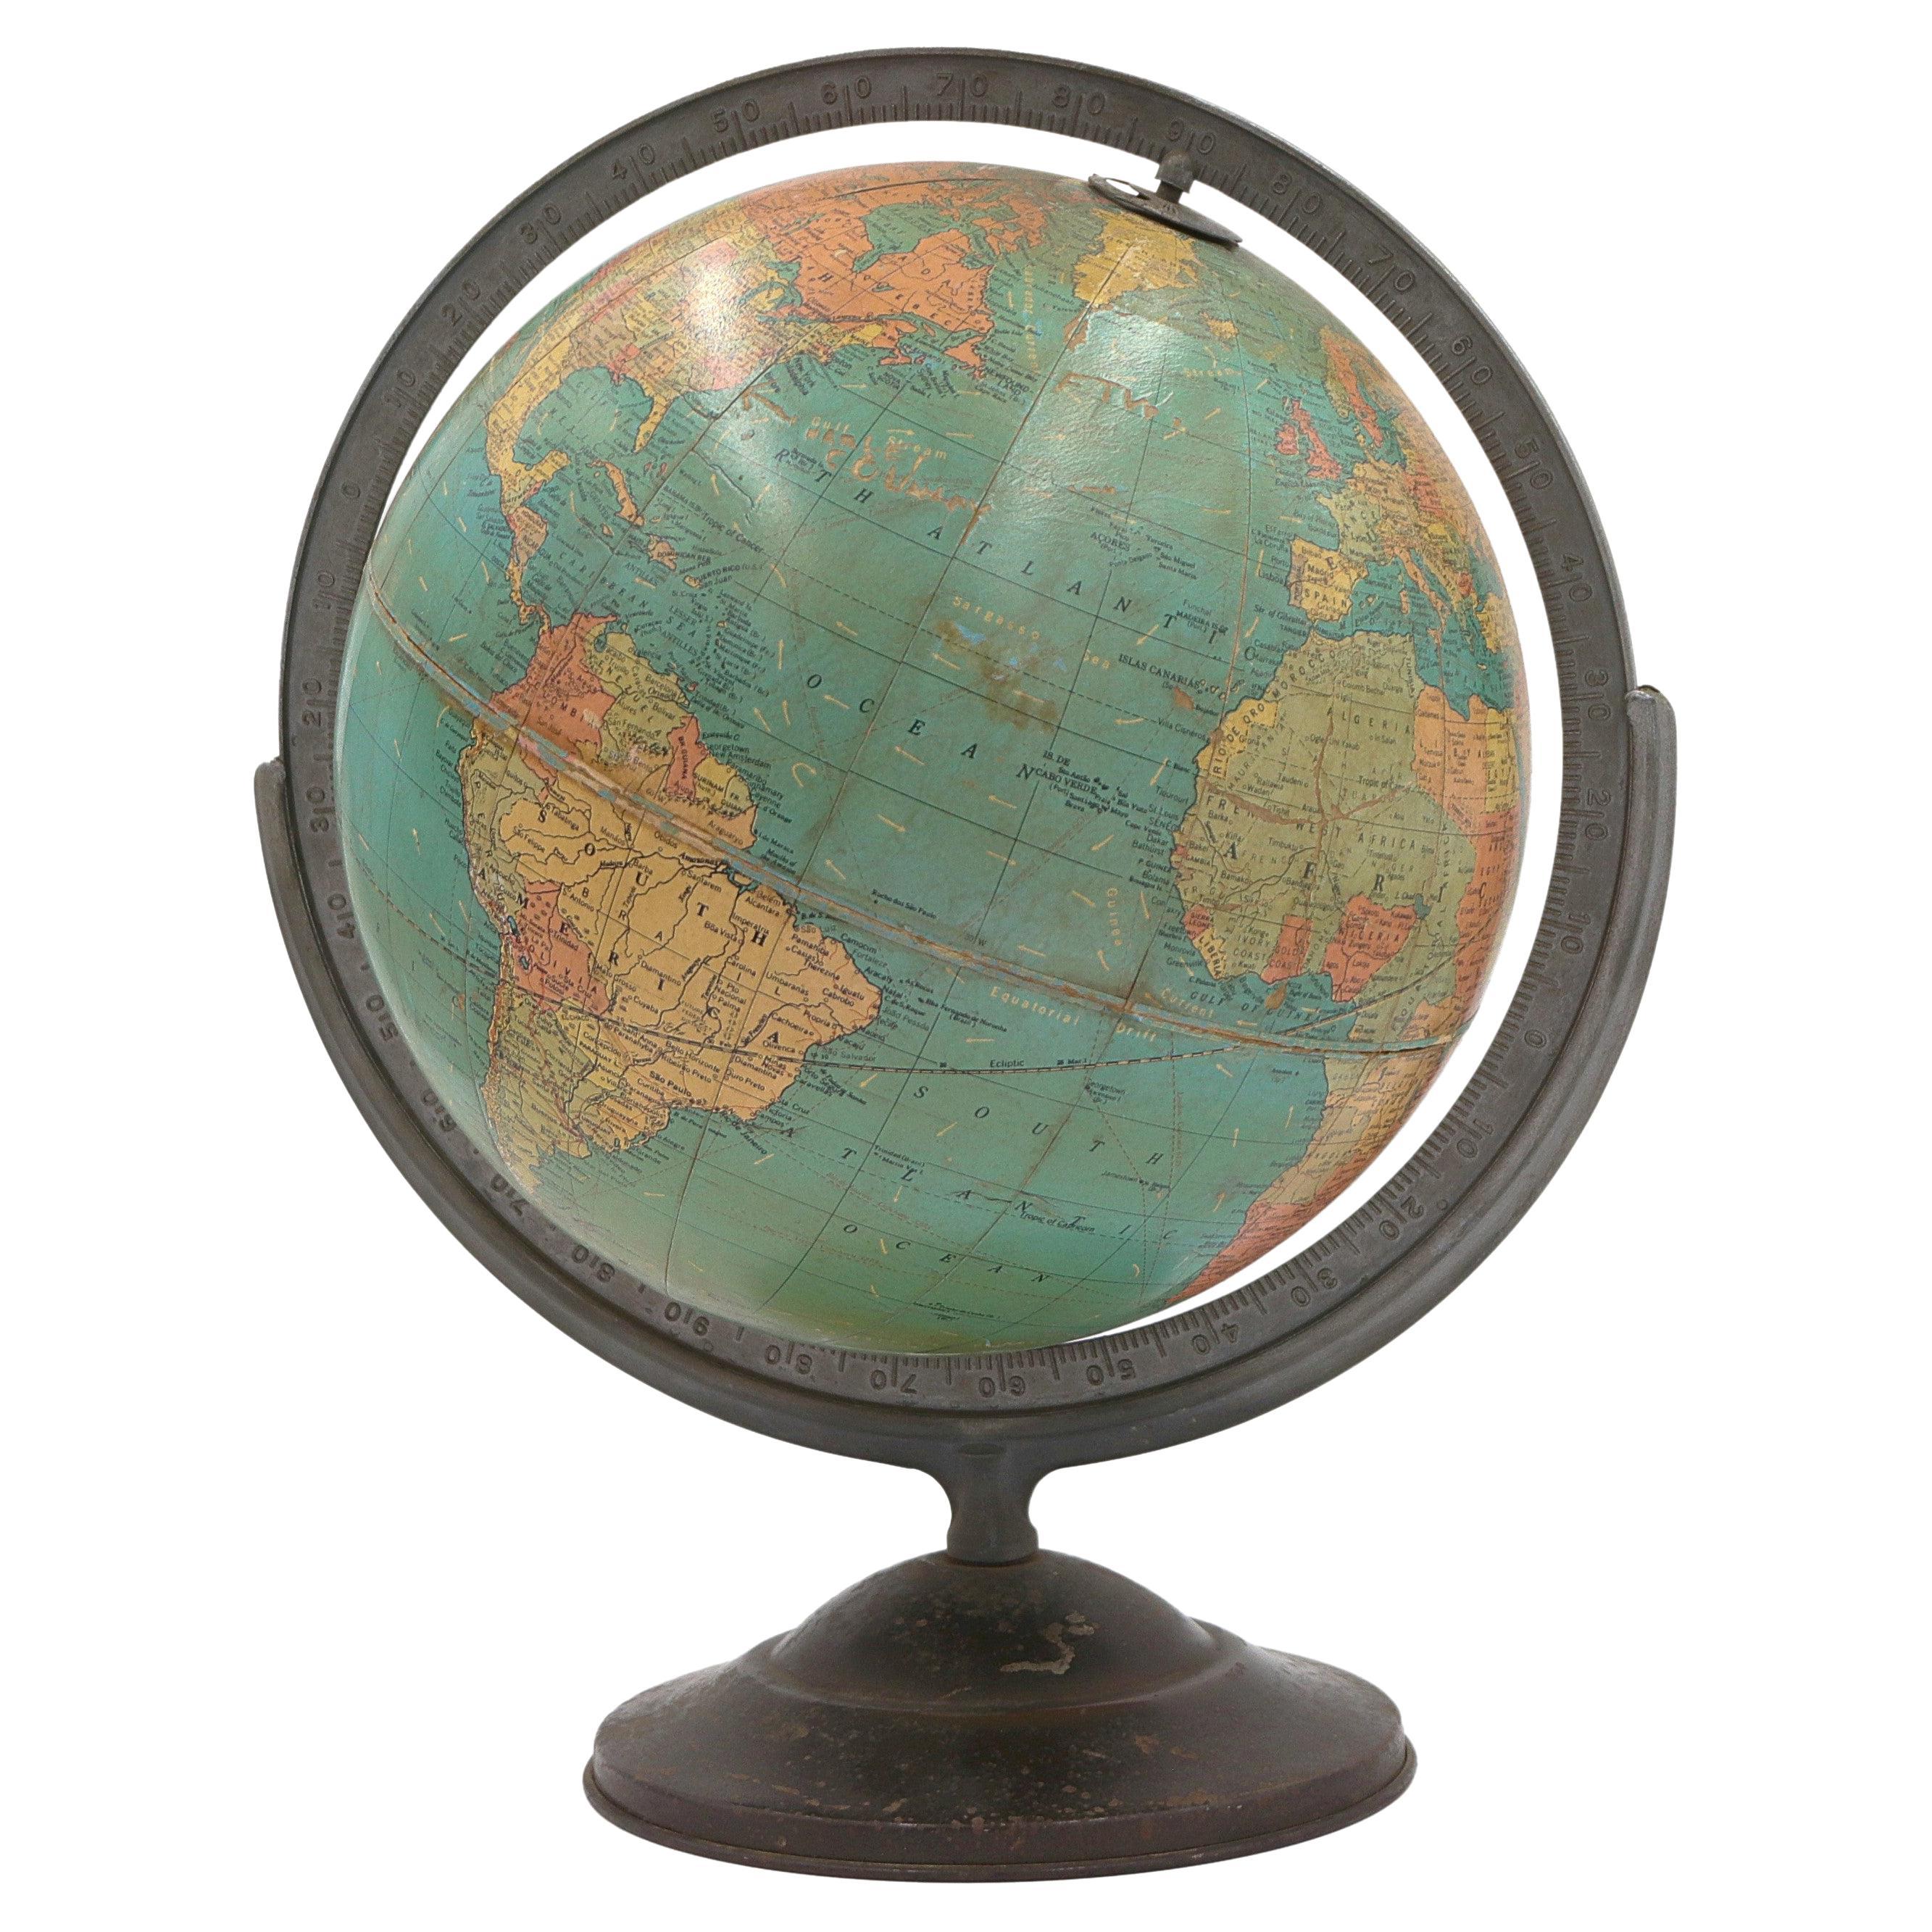 1930s Table Globe Mounted on Base by Replogle Manufacturers